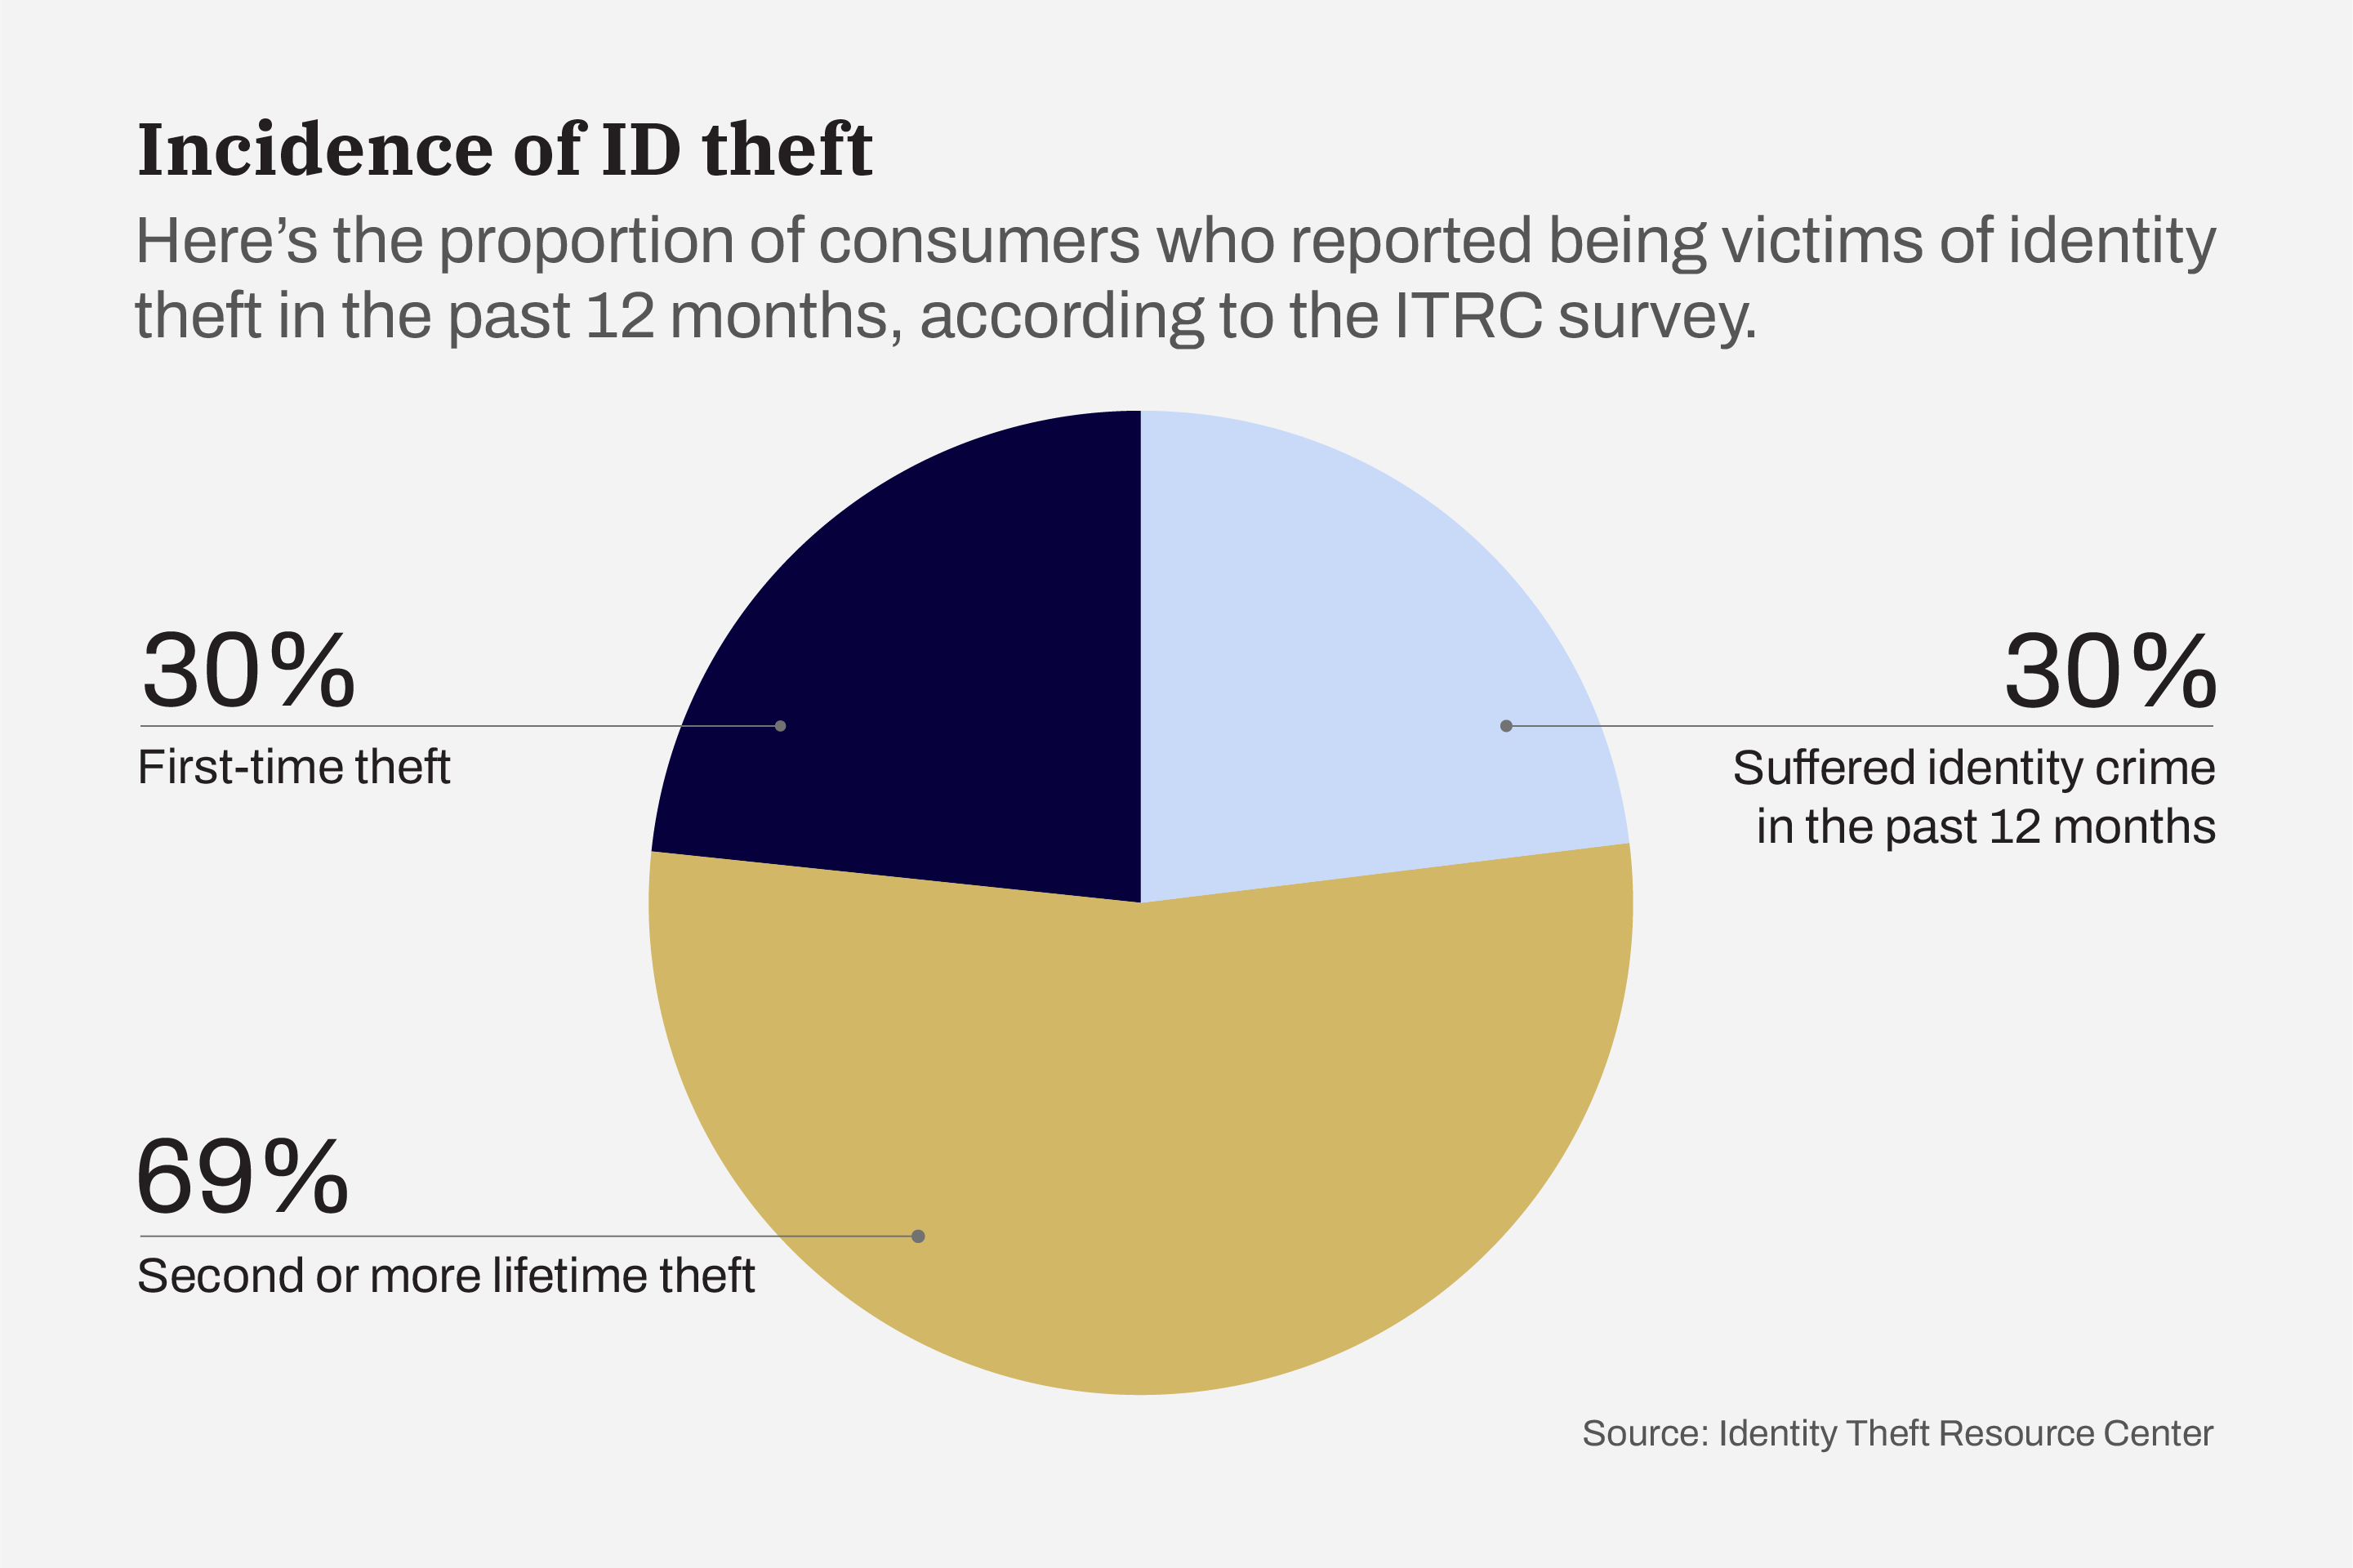 Graphic: Incidence of ID Theft